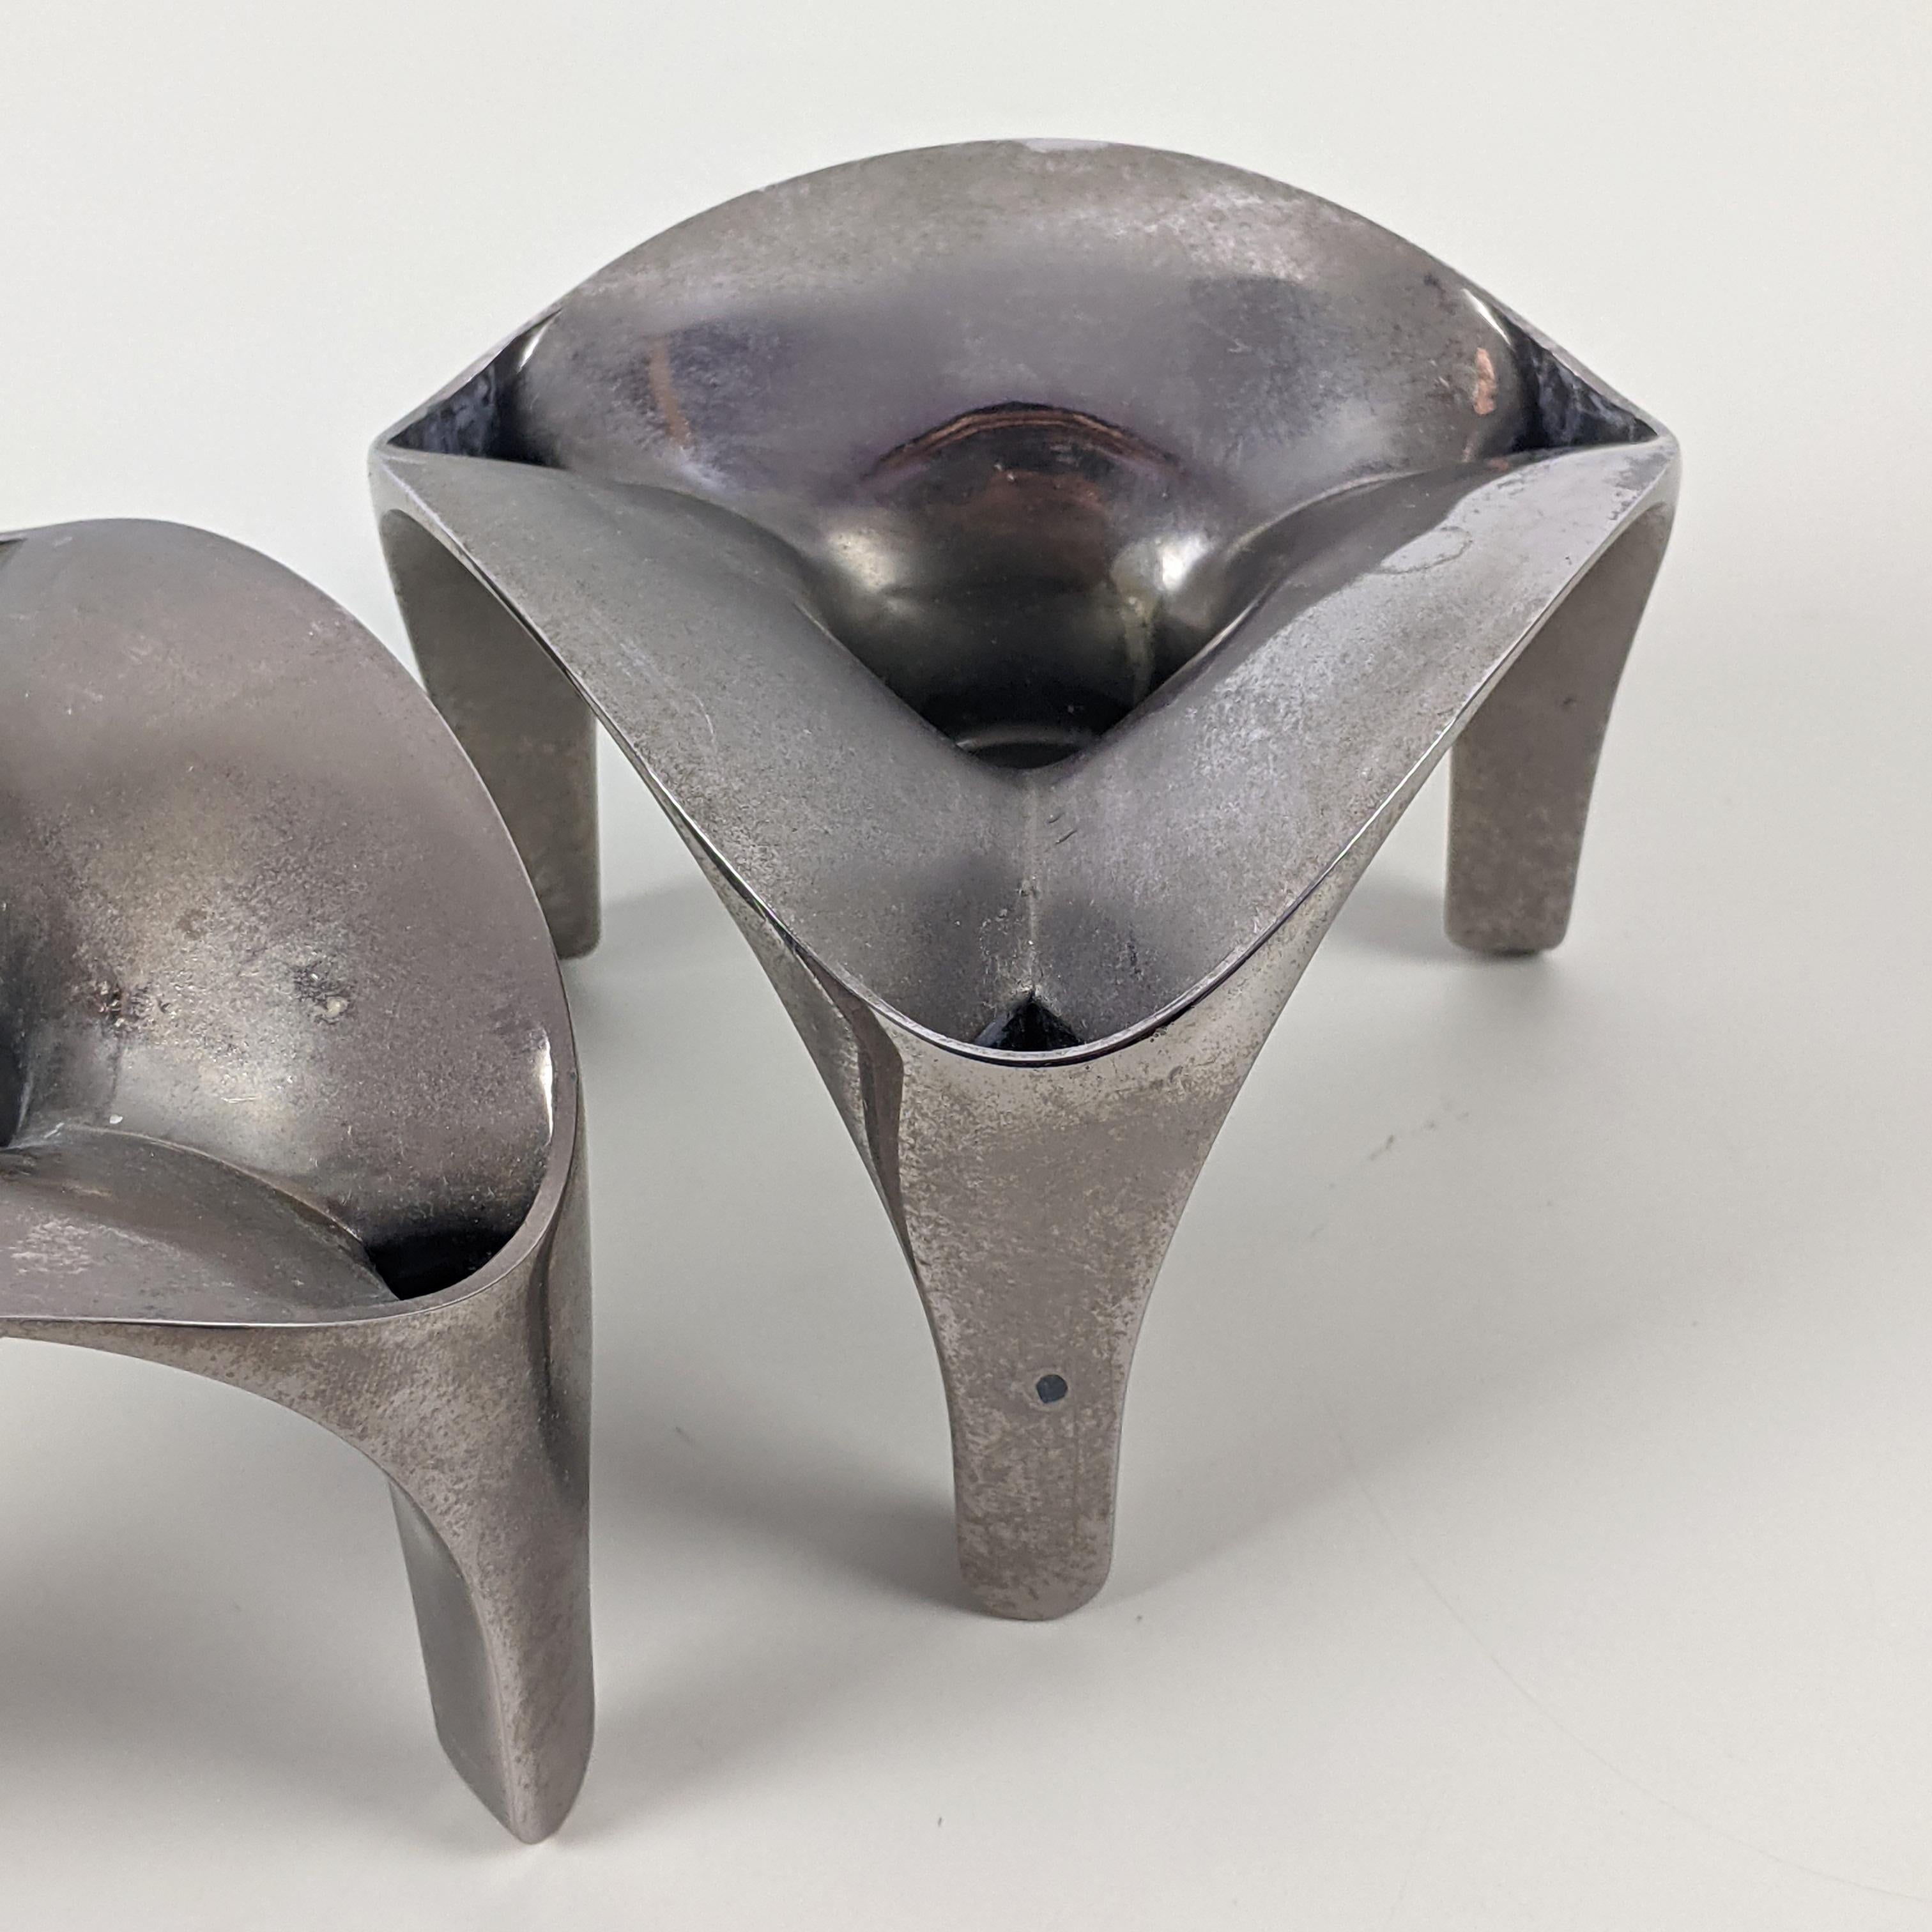 Caesar Stoffi for Nagel, Pair of Modular Stacking Elements/Candle Holders, 1970s For Sale 4